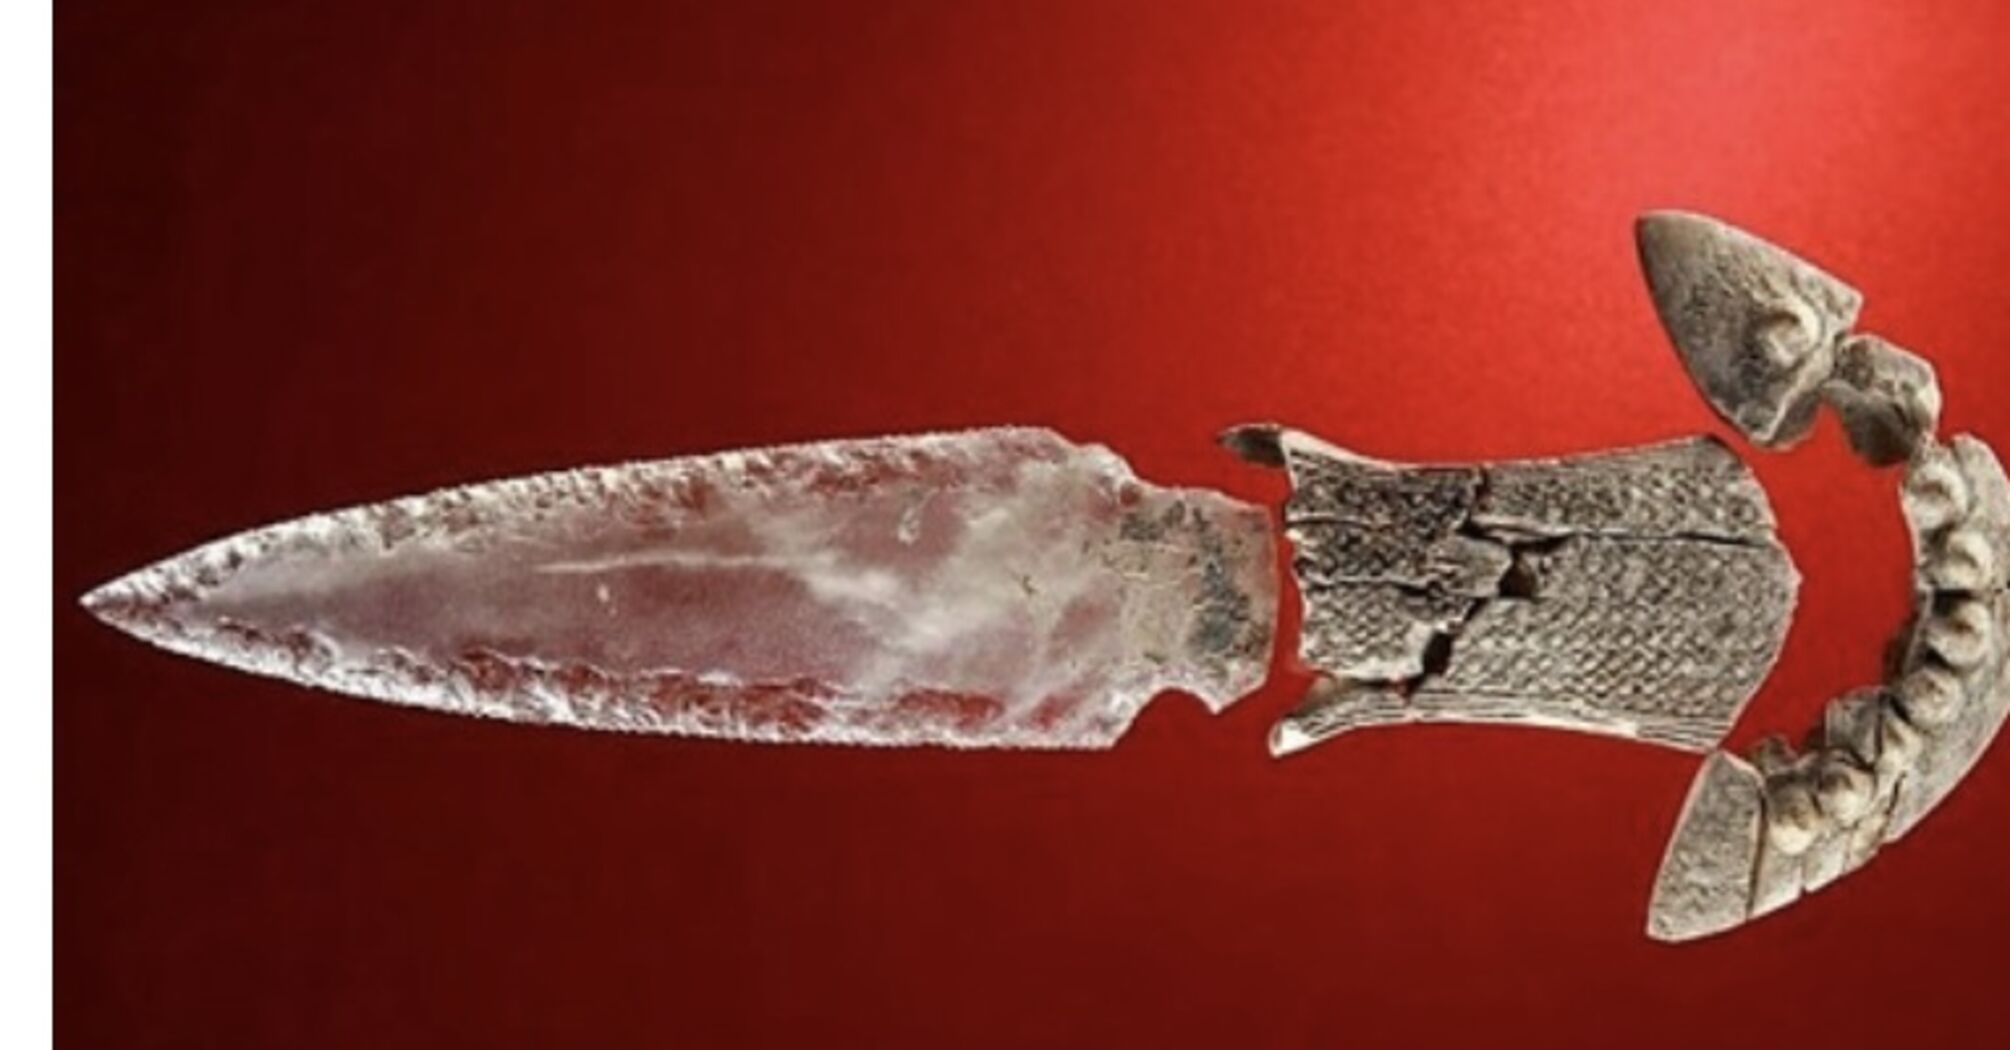 A 5000-year-old crystal dagger found in Spain: an example of the highest craftsmanship